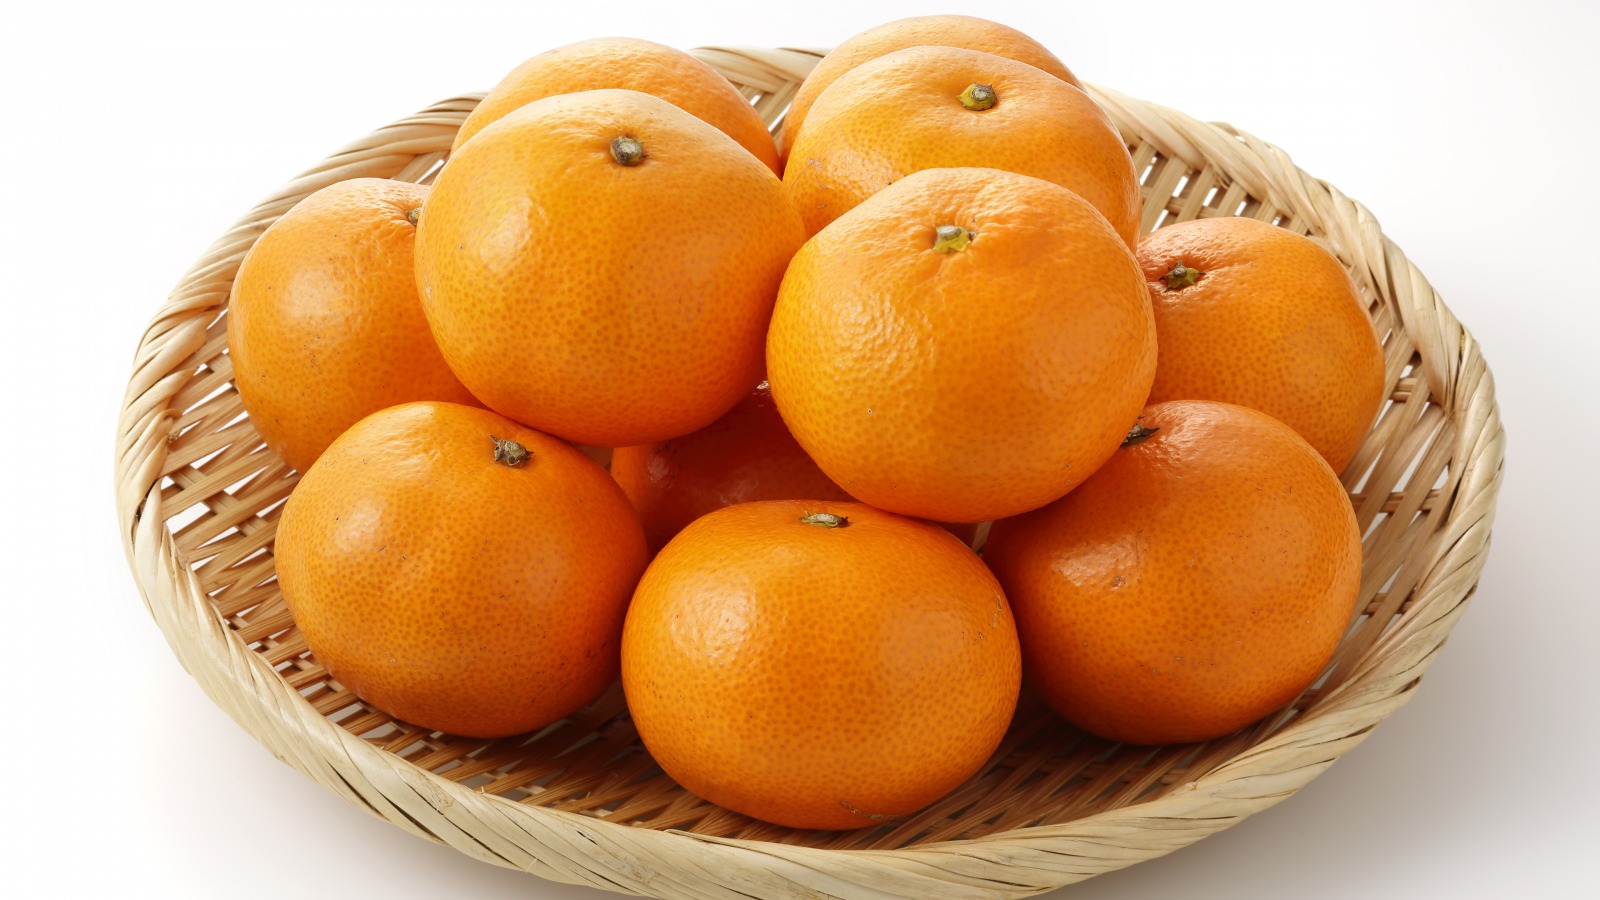 Heres Why A Crate Of Oranges Just Sold For 9600 In Japan